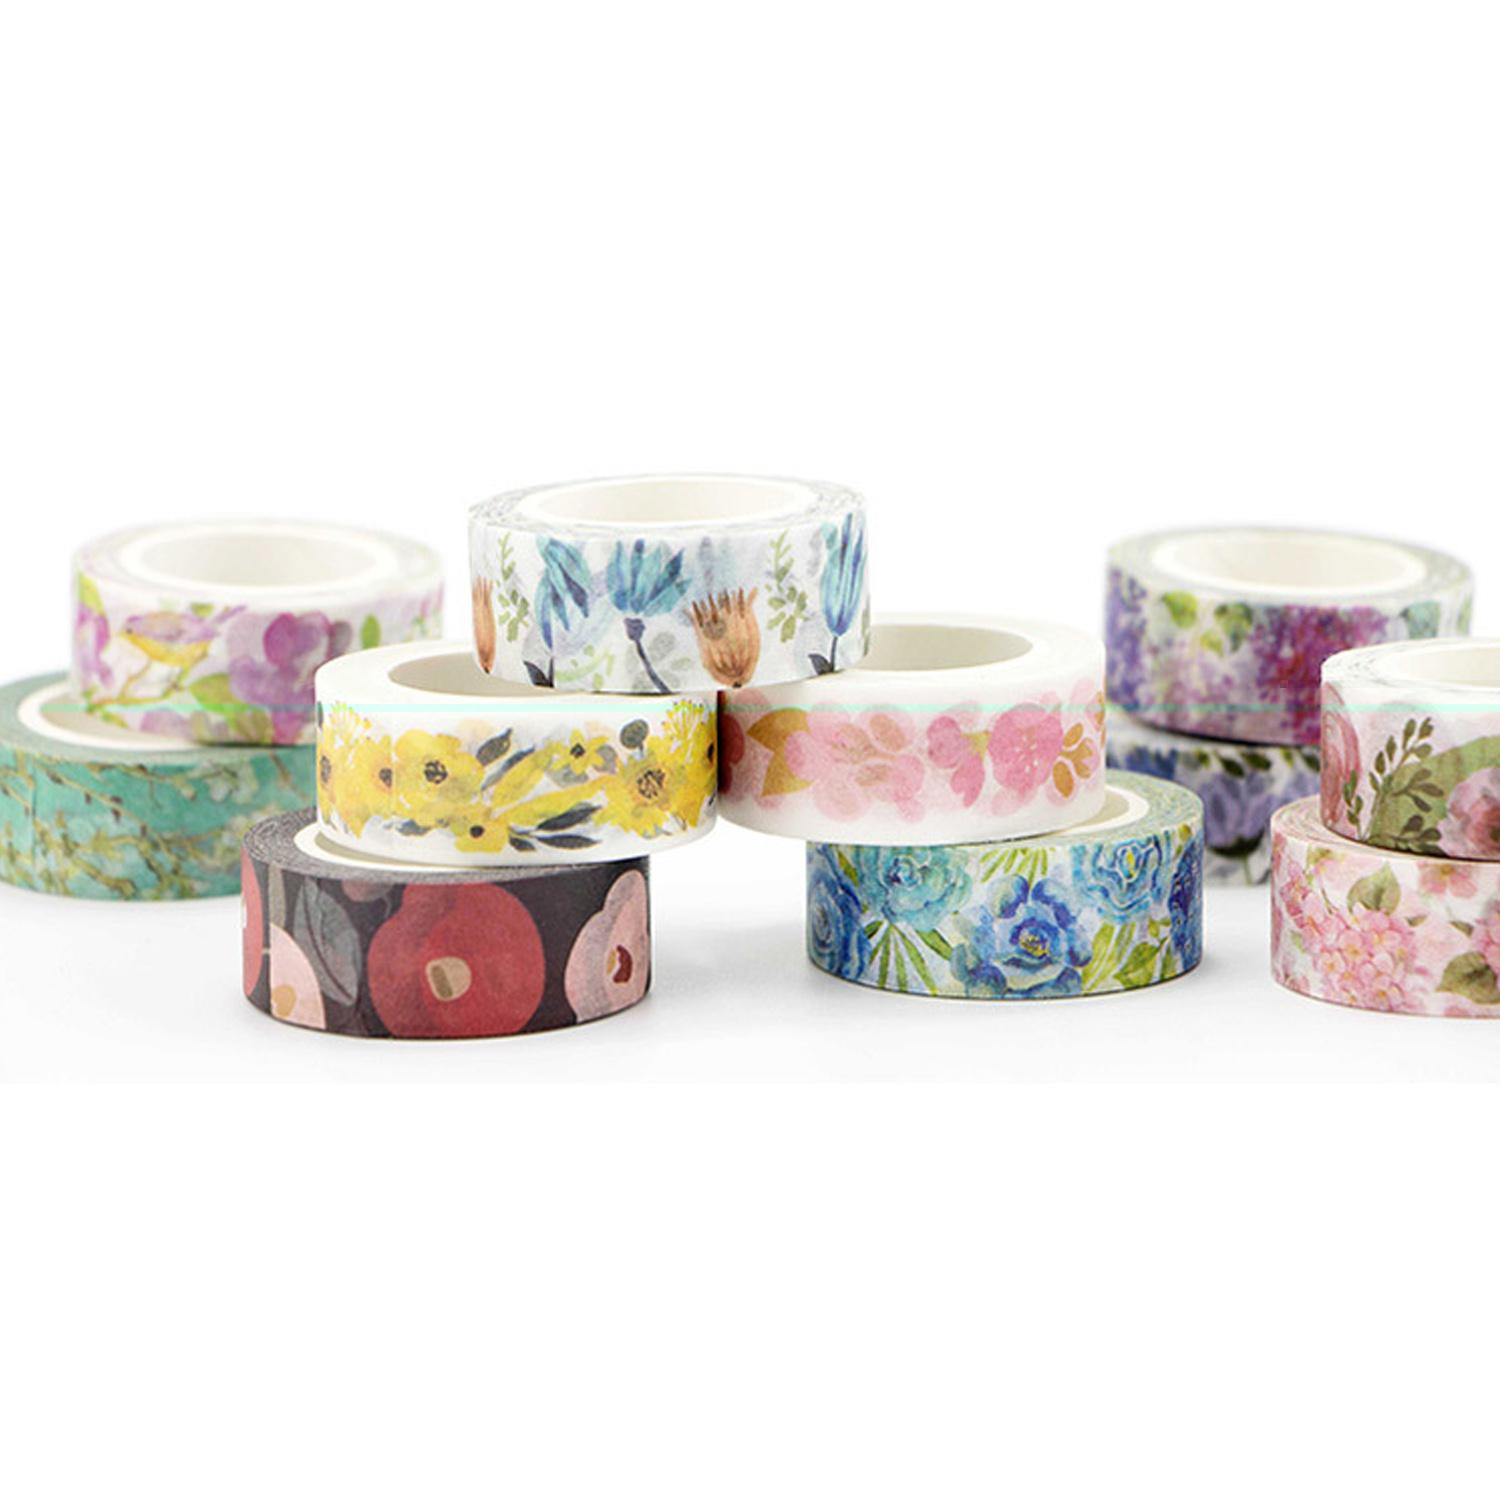 12 Rolls Decorative Washi Masking Tape for Label Notebook DIY Decoration Gift Wrapping Office Party Supplies Random Styles 1.5cm Width 7m Length - intl